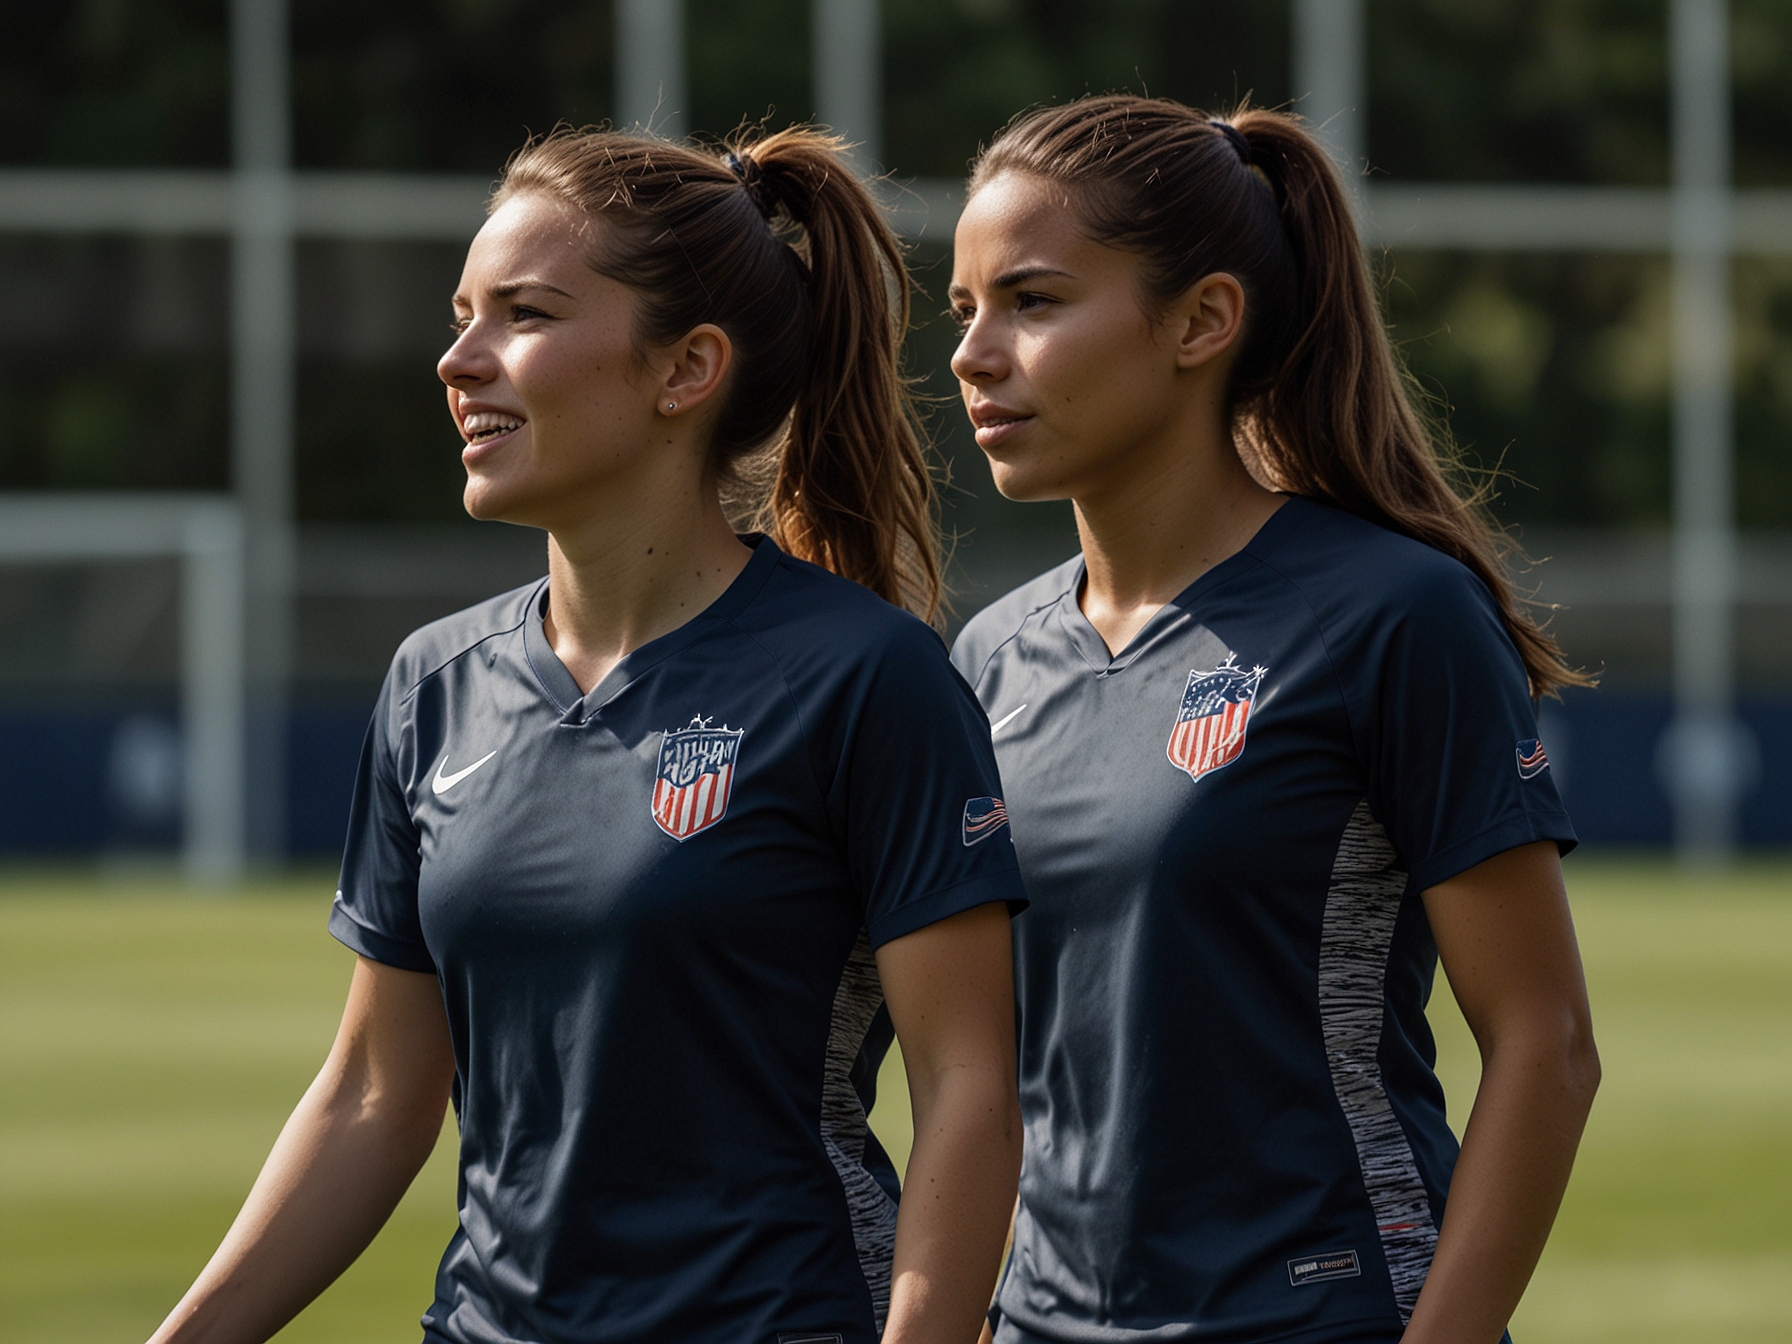 Young stars Sophia Smith and Catarina Macario during a training session. Their inclusion in the roster highlights the USWNT's strategy to blend seasoned veterans and promising newcomers.